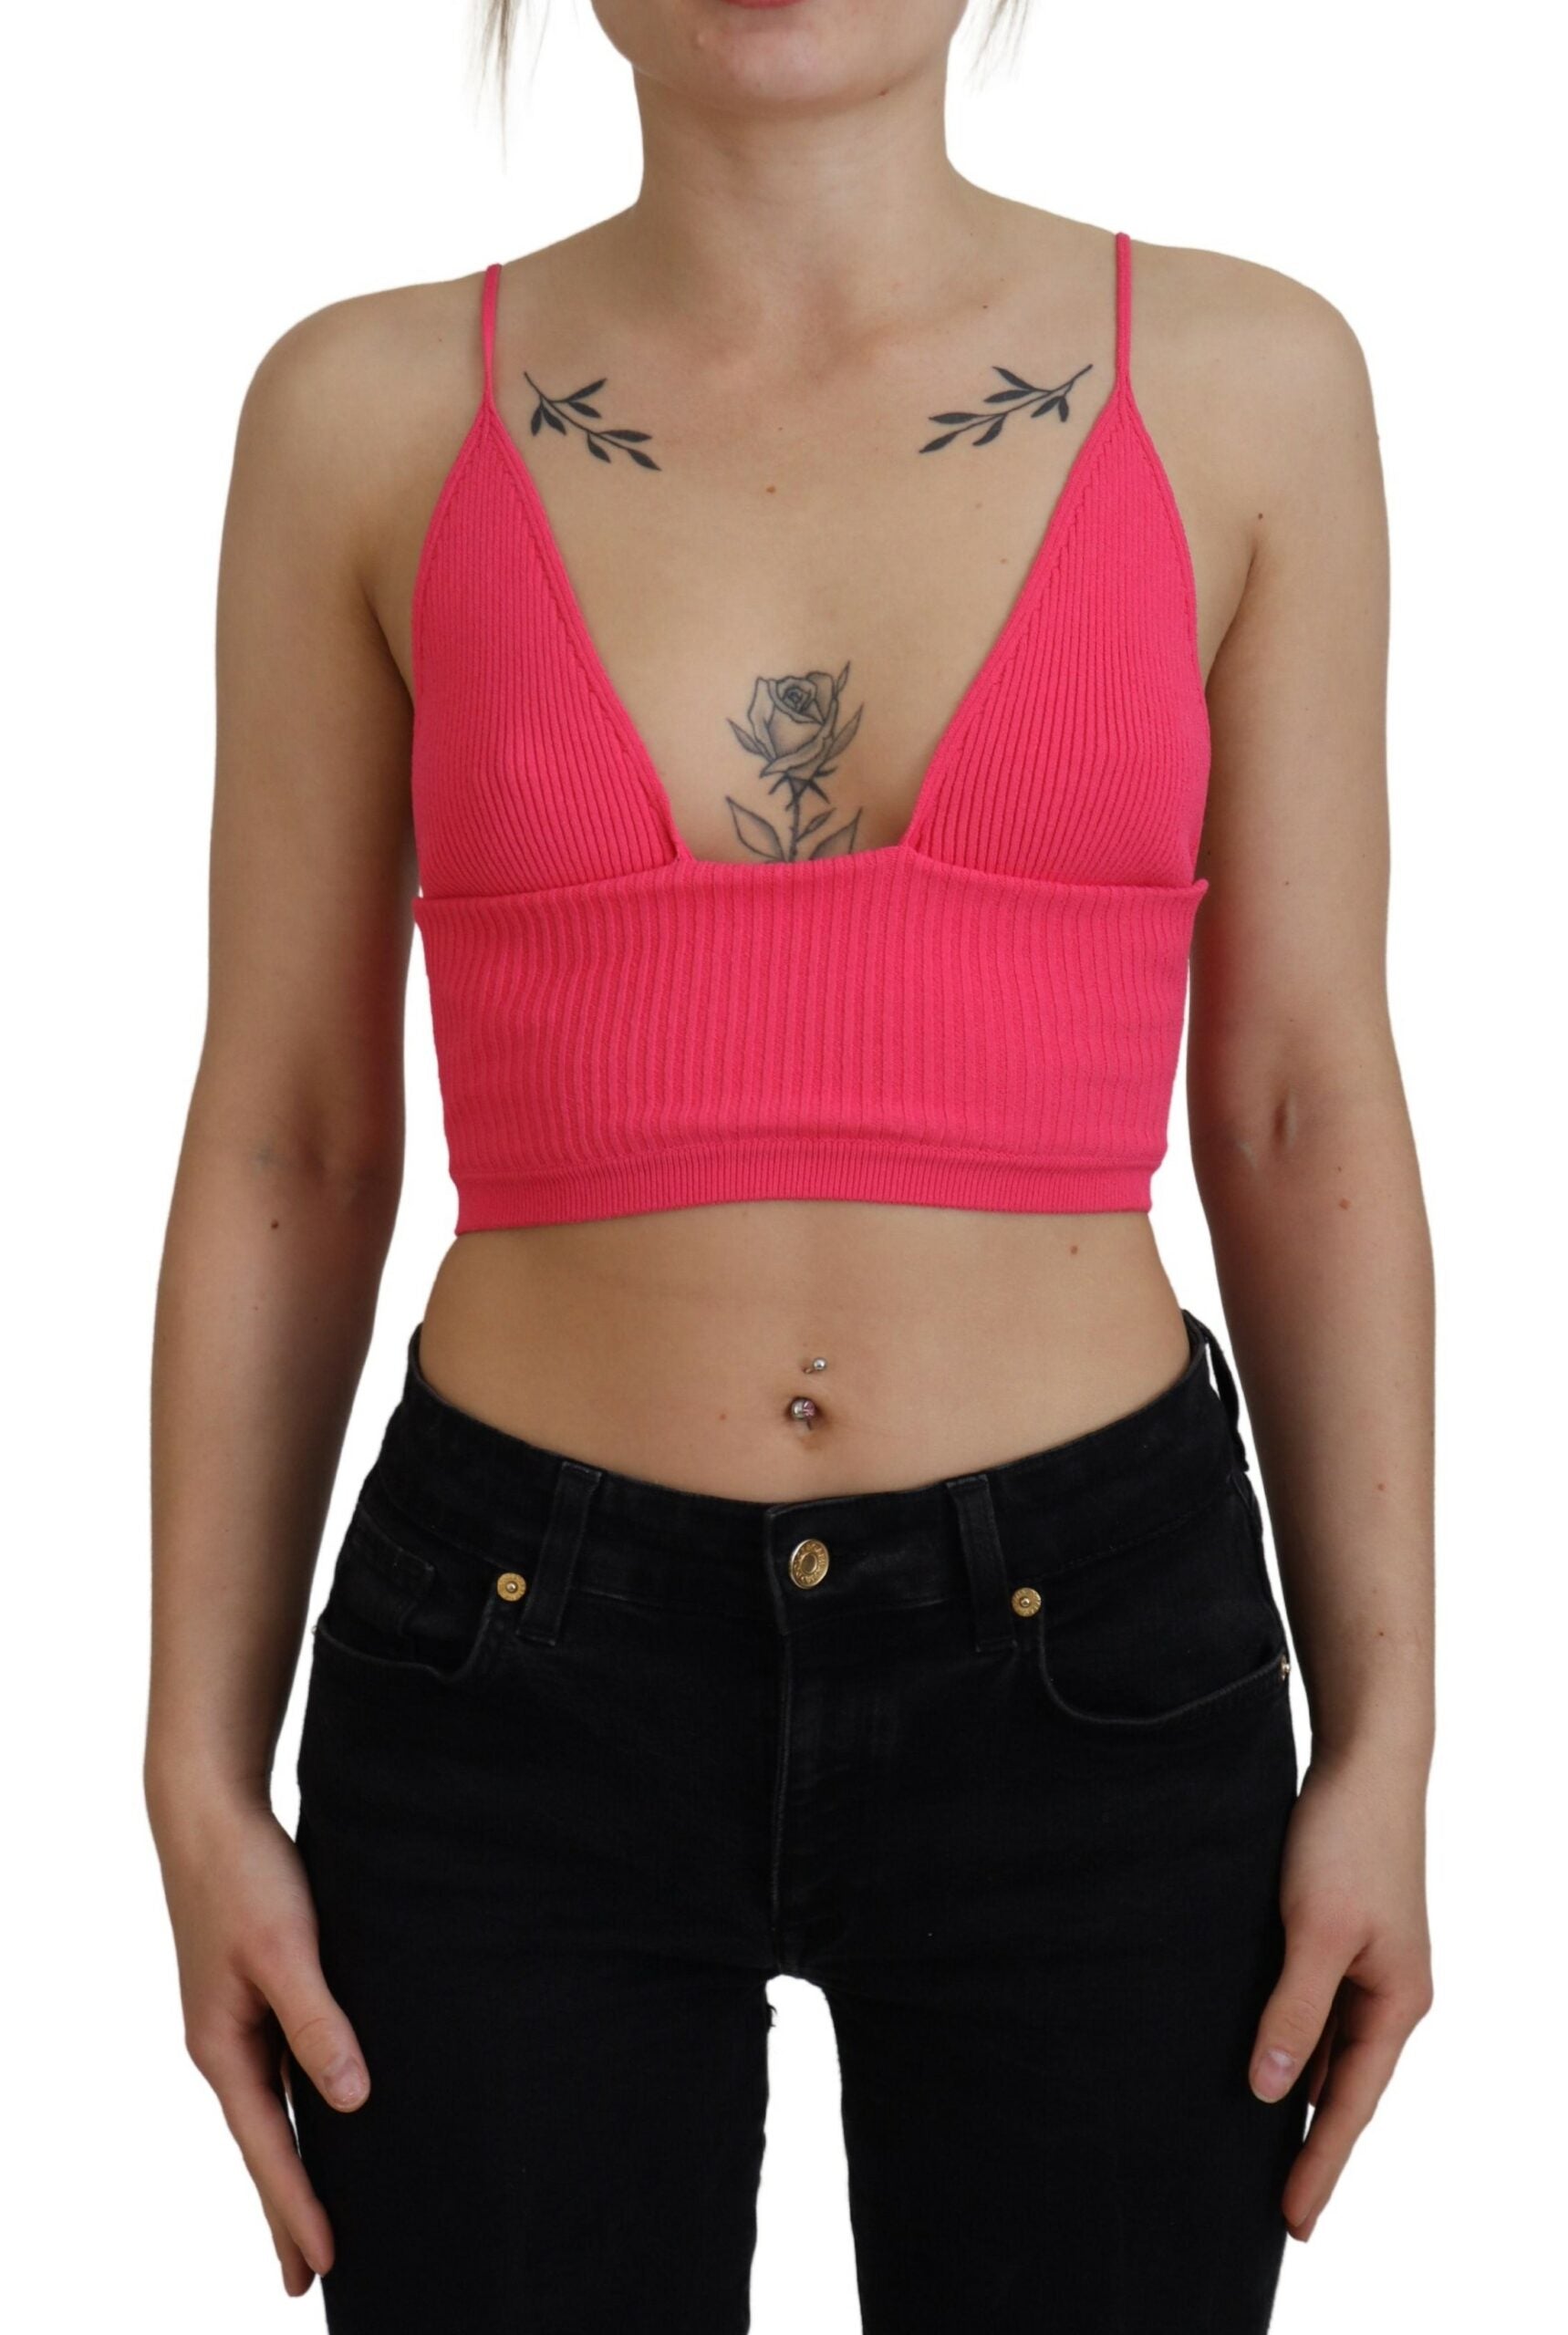 Dsquared² Pink Ribbed Knit Bra Cropped Spaghetti Strap Top